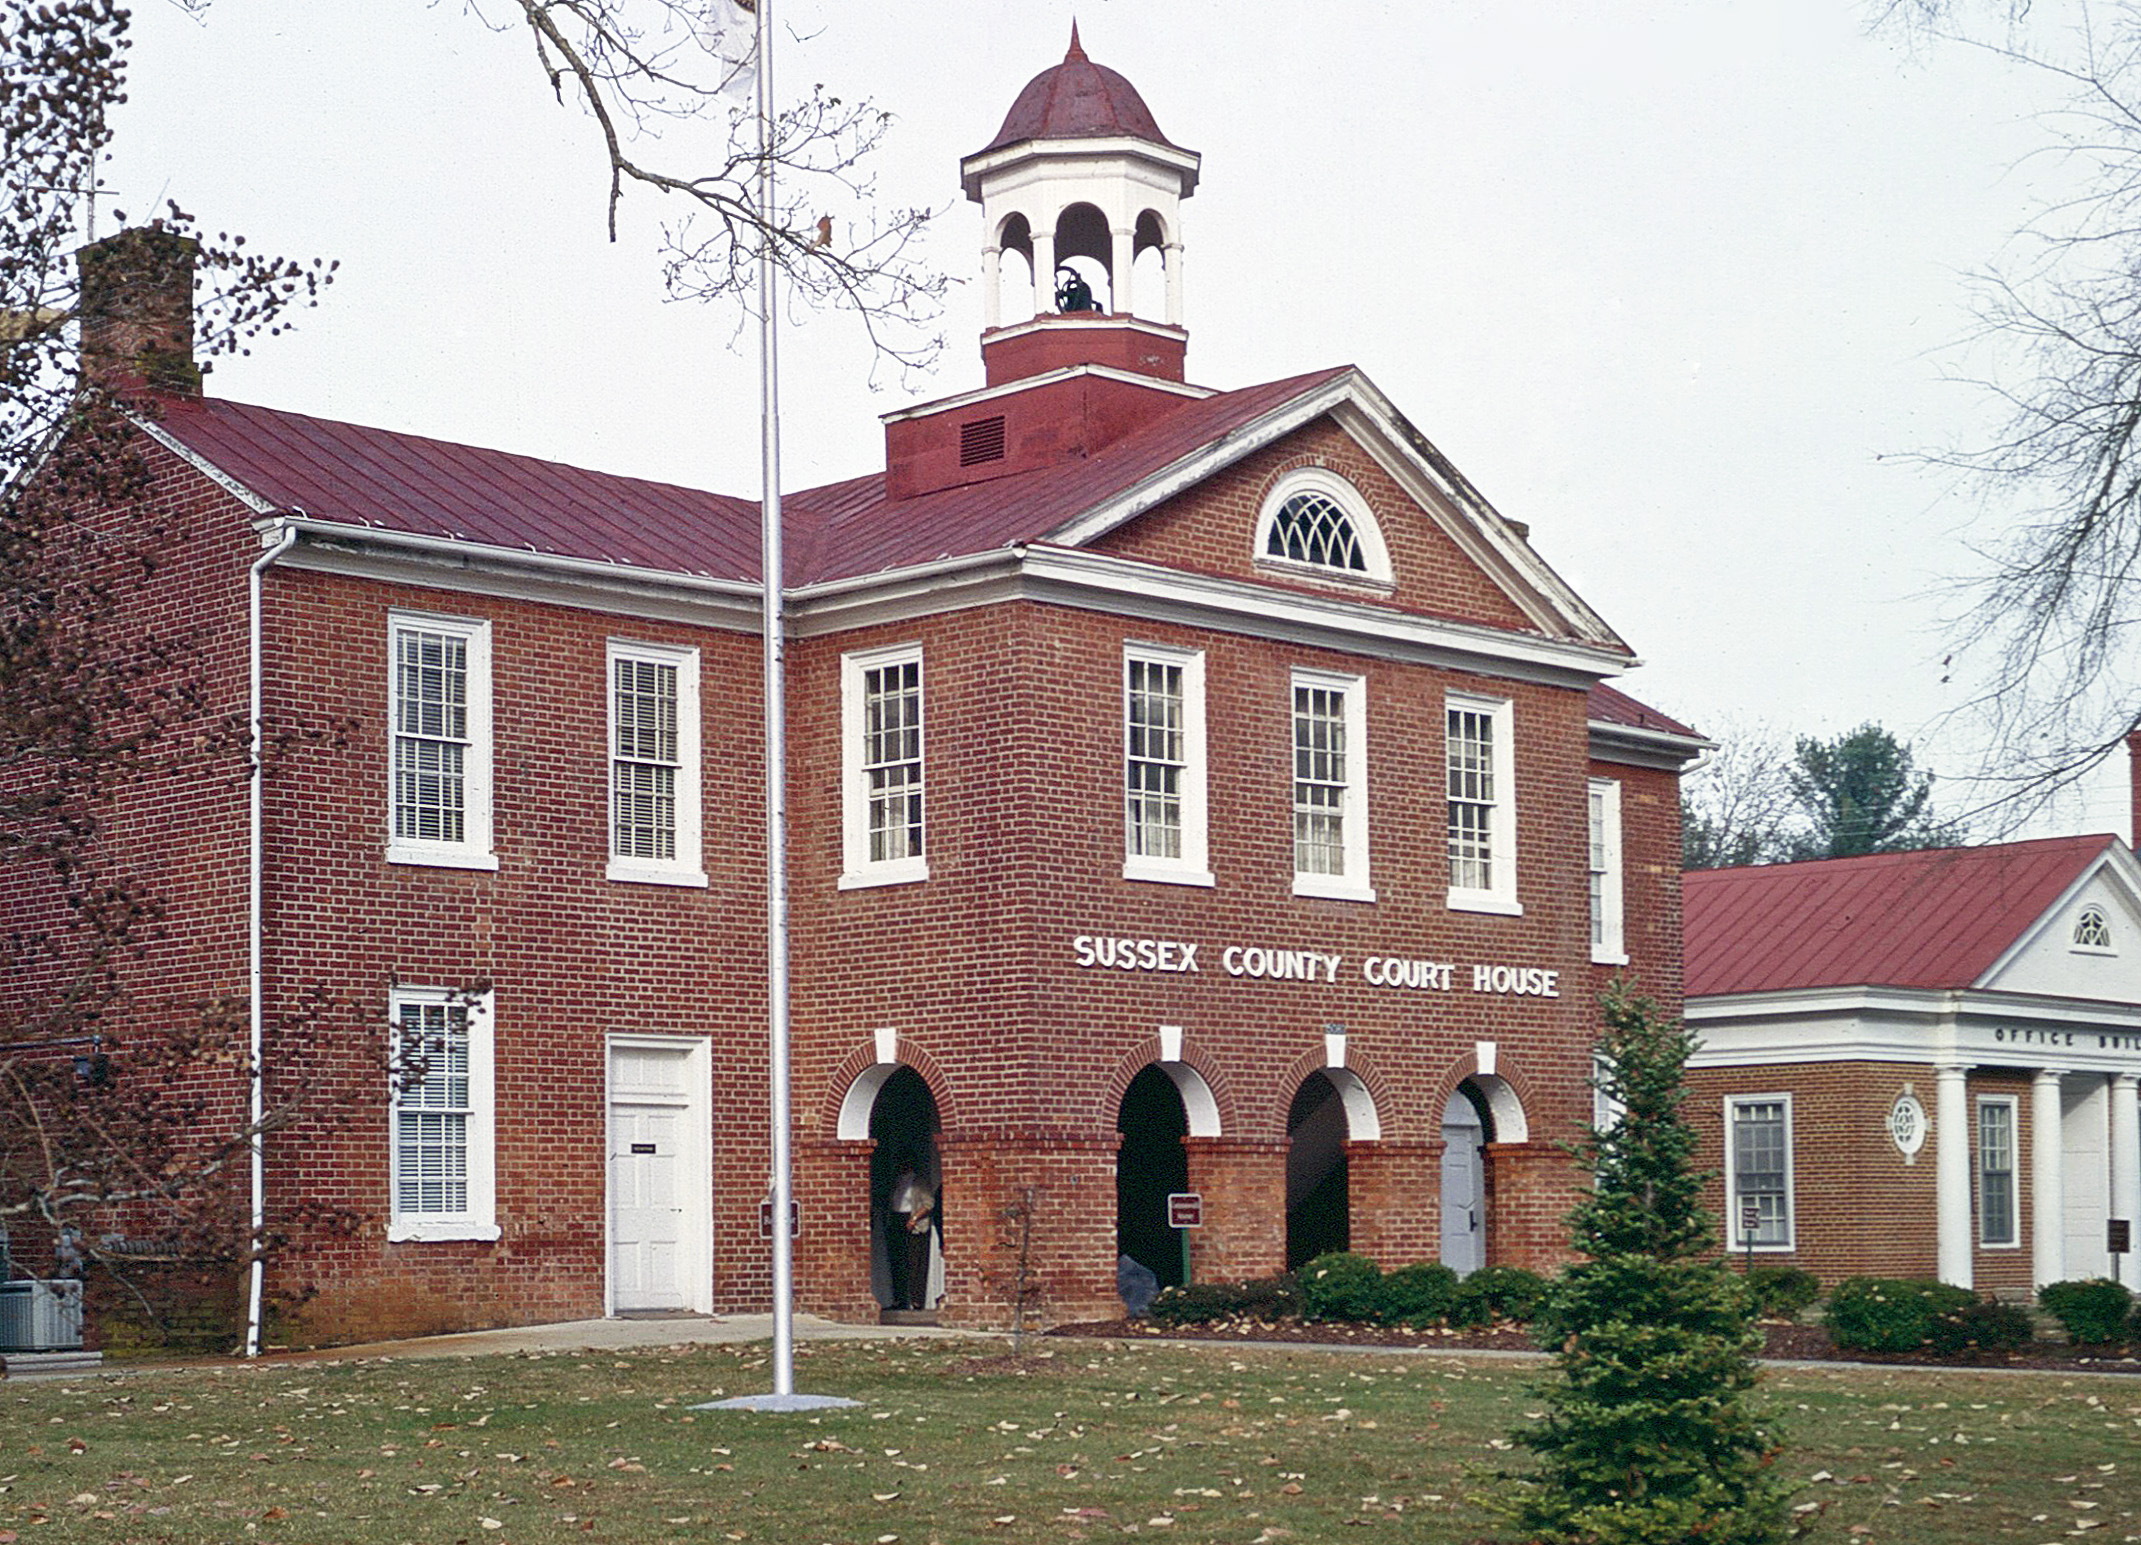 091-0072_Sussex_Courthouse_HD_2003_VLR_Online